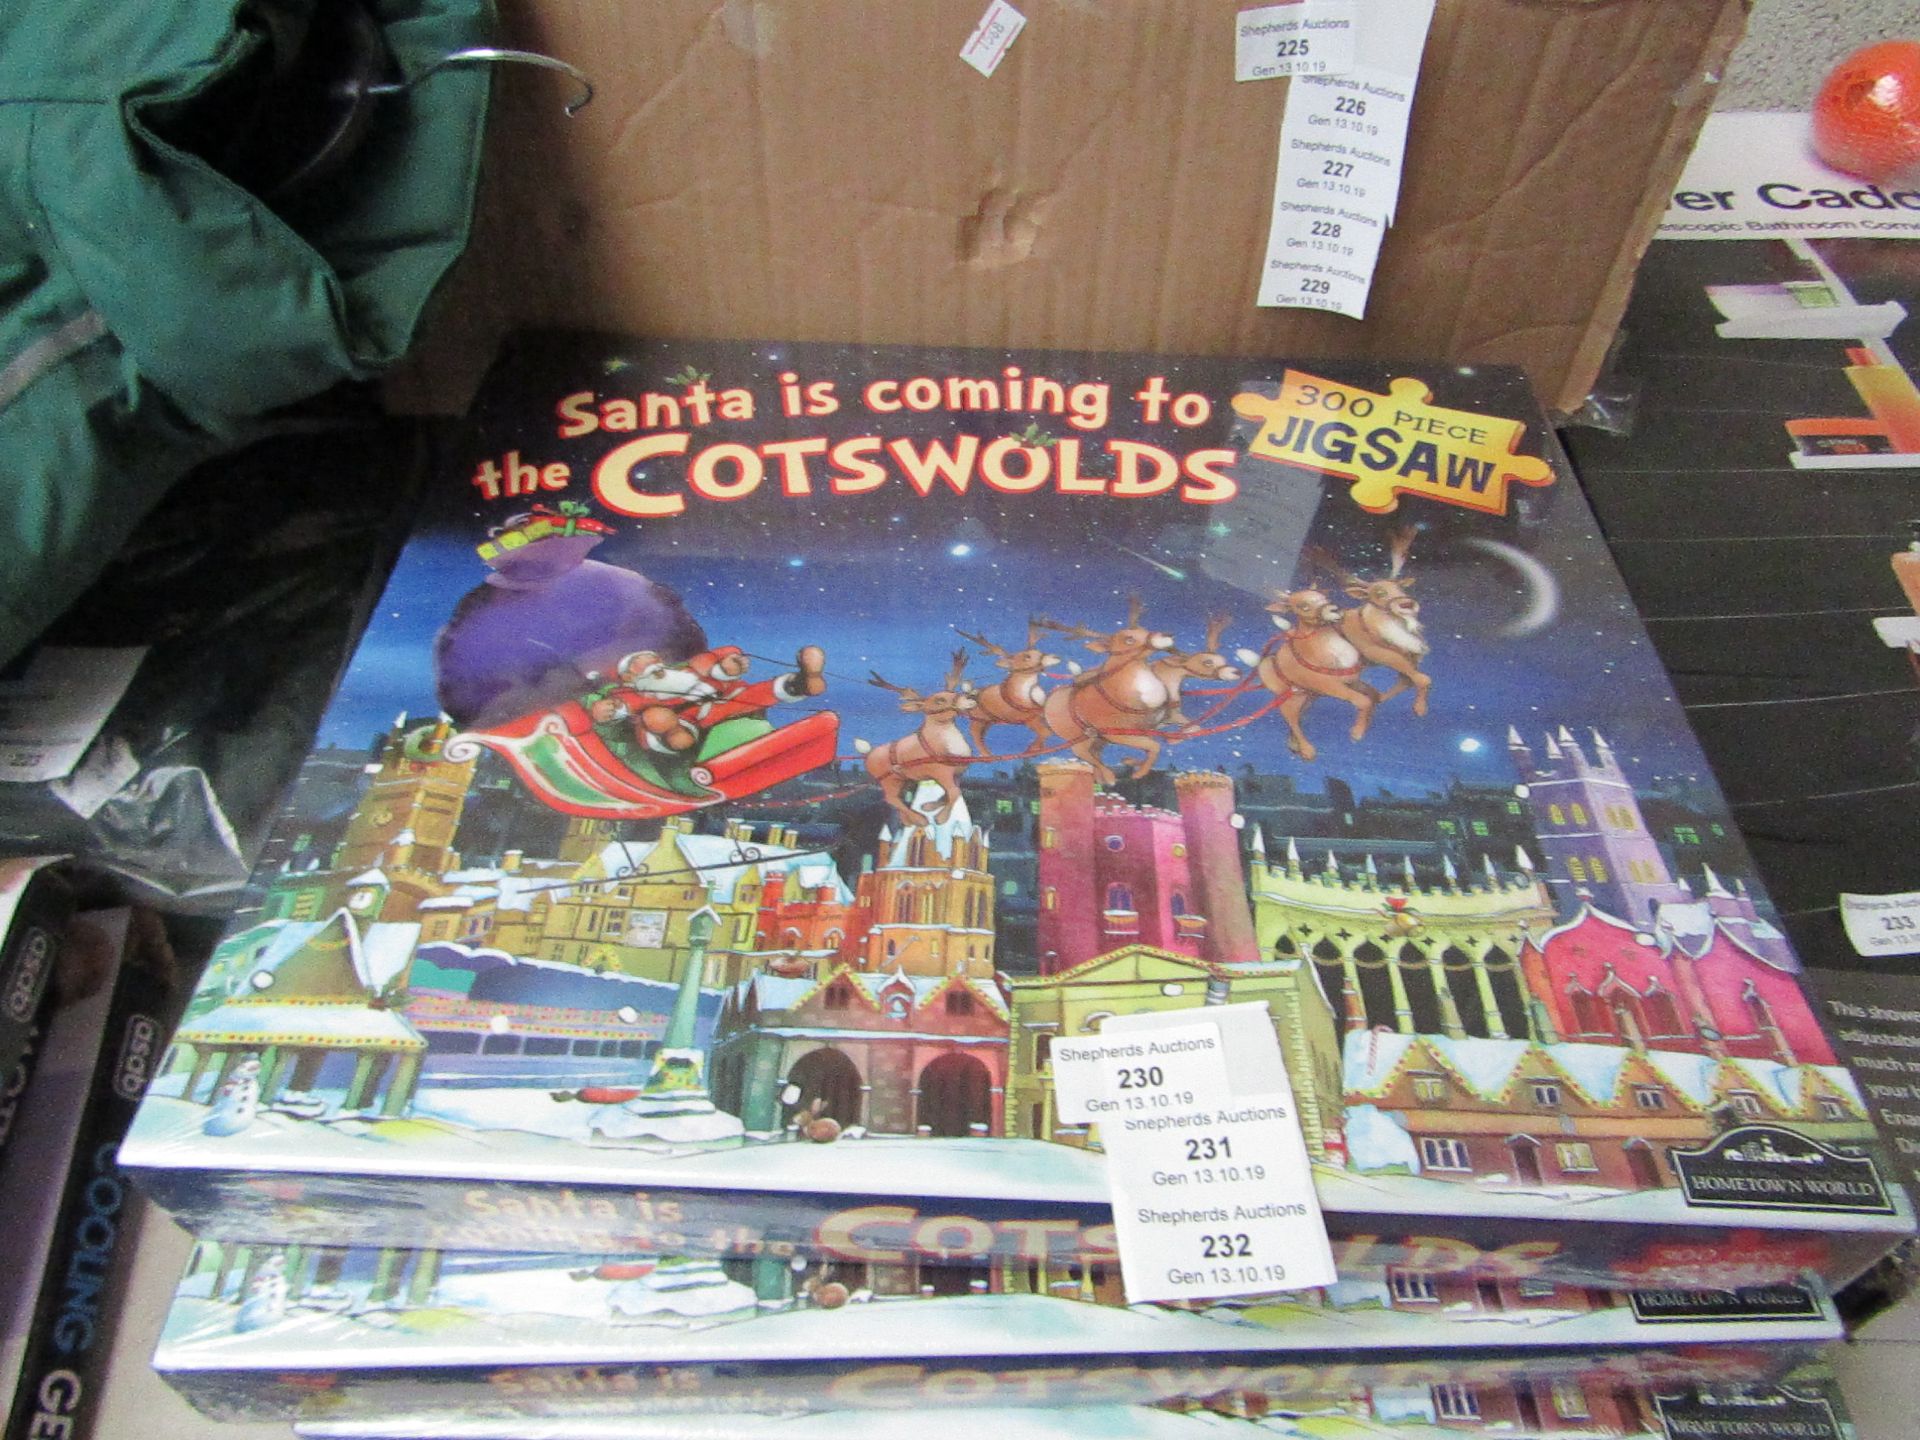 300 Piece cotswolds jigsaw puzzle, new and boxed.